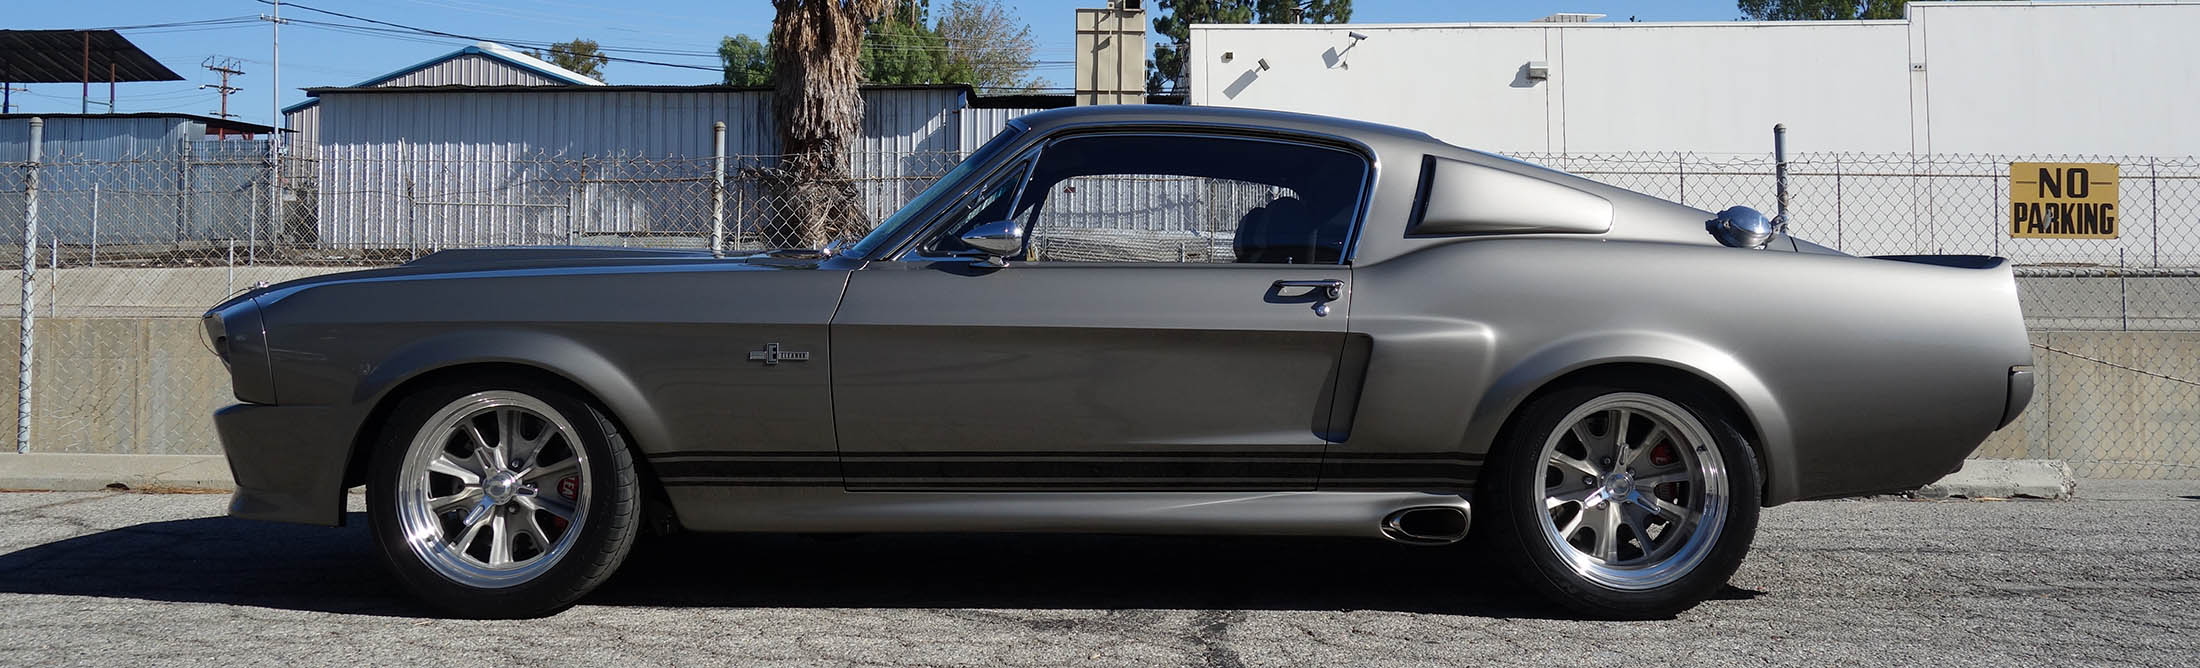 Own A Brand New Eleanor Mustang From Gone In 60 Seconds For 0 000 Bloomberg